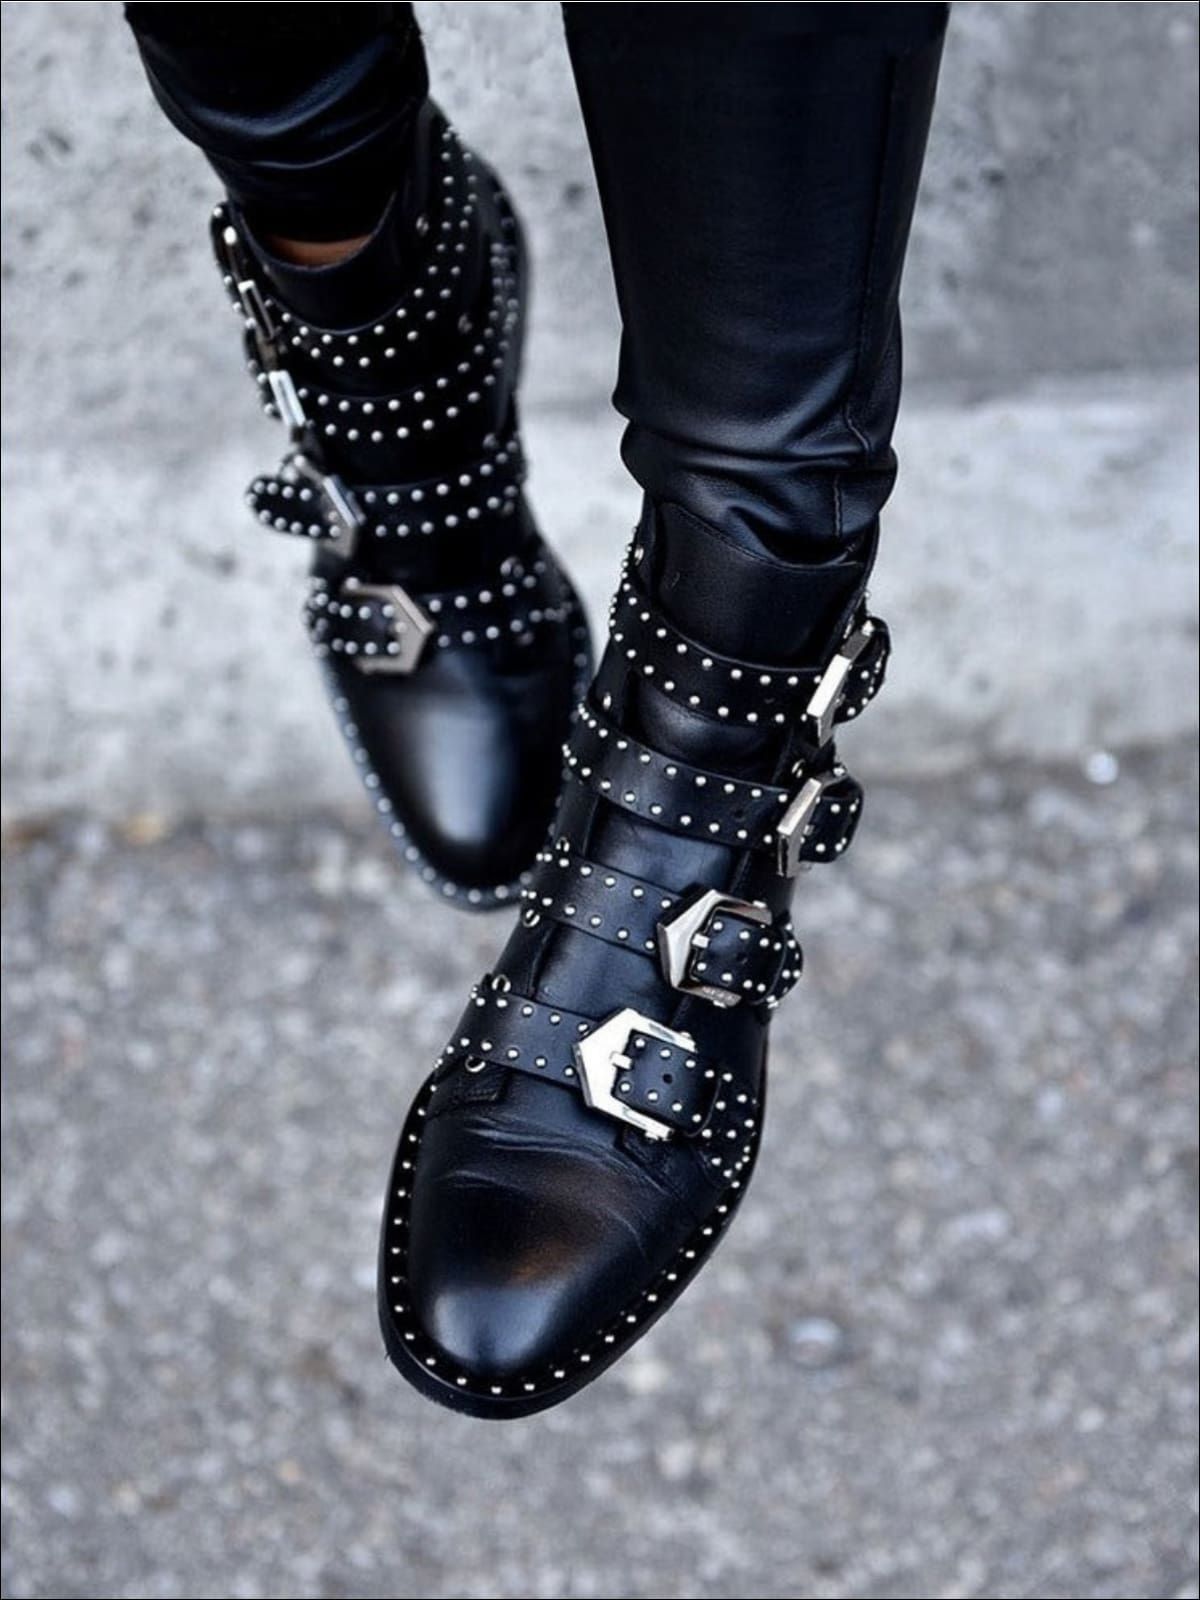 How to Style Studded Booties: Best 13 Stylish & Edge Outfit Ideas for Women